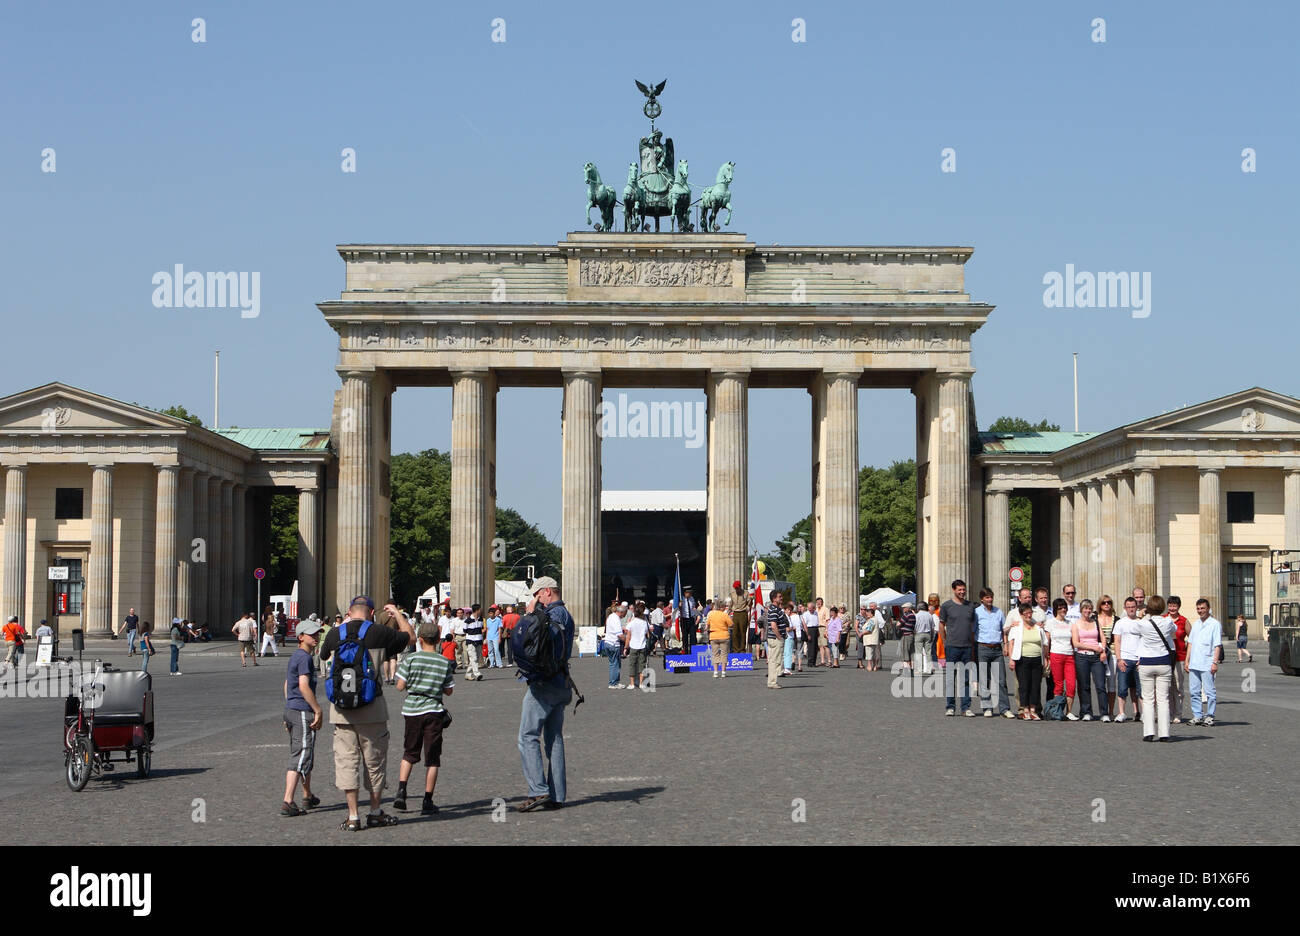 Berlin Germany the historic Brandenburg Gate in the Pariser Platz crowned by the Quadriga scupture with many tourists Stock Photo